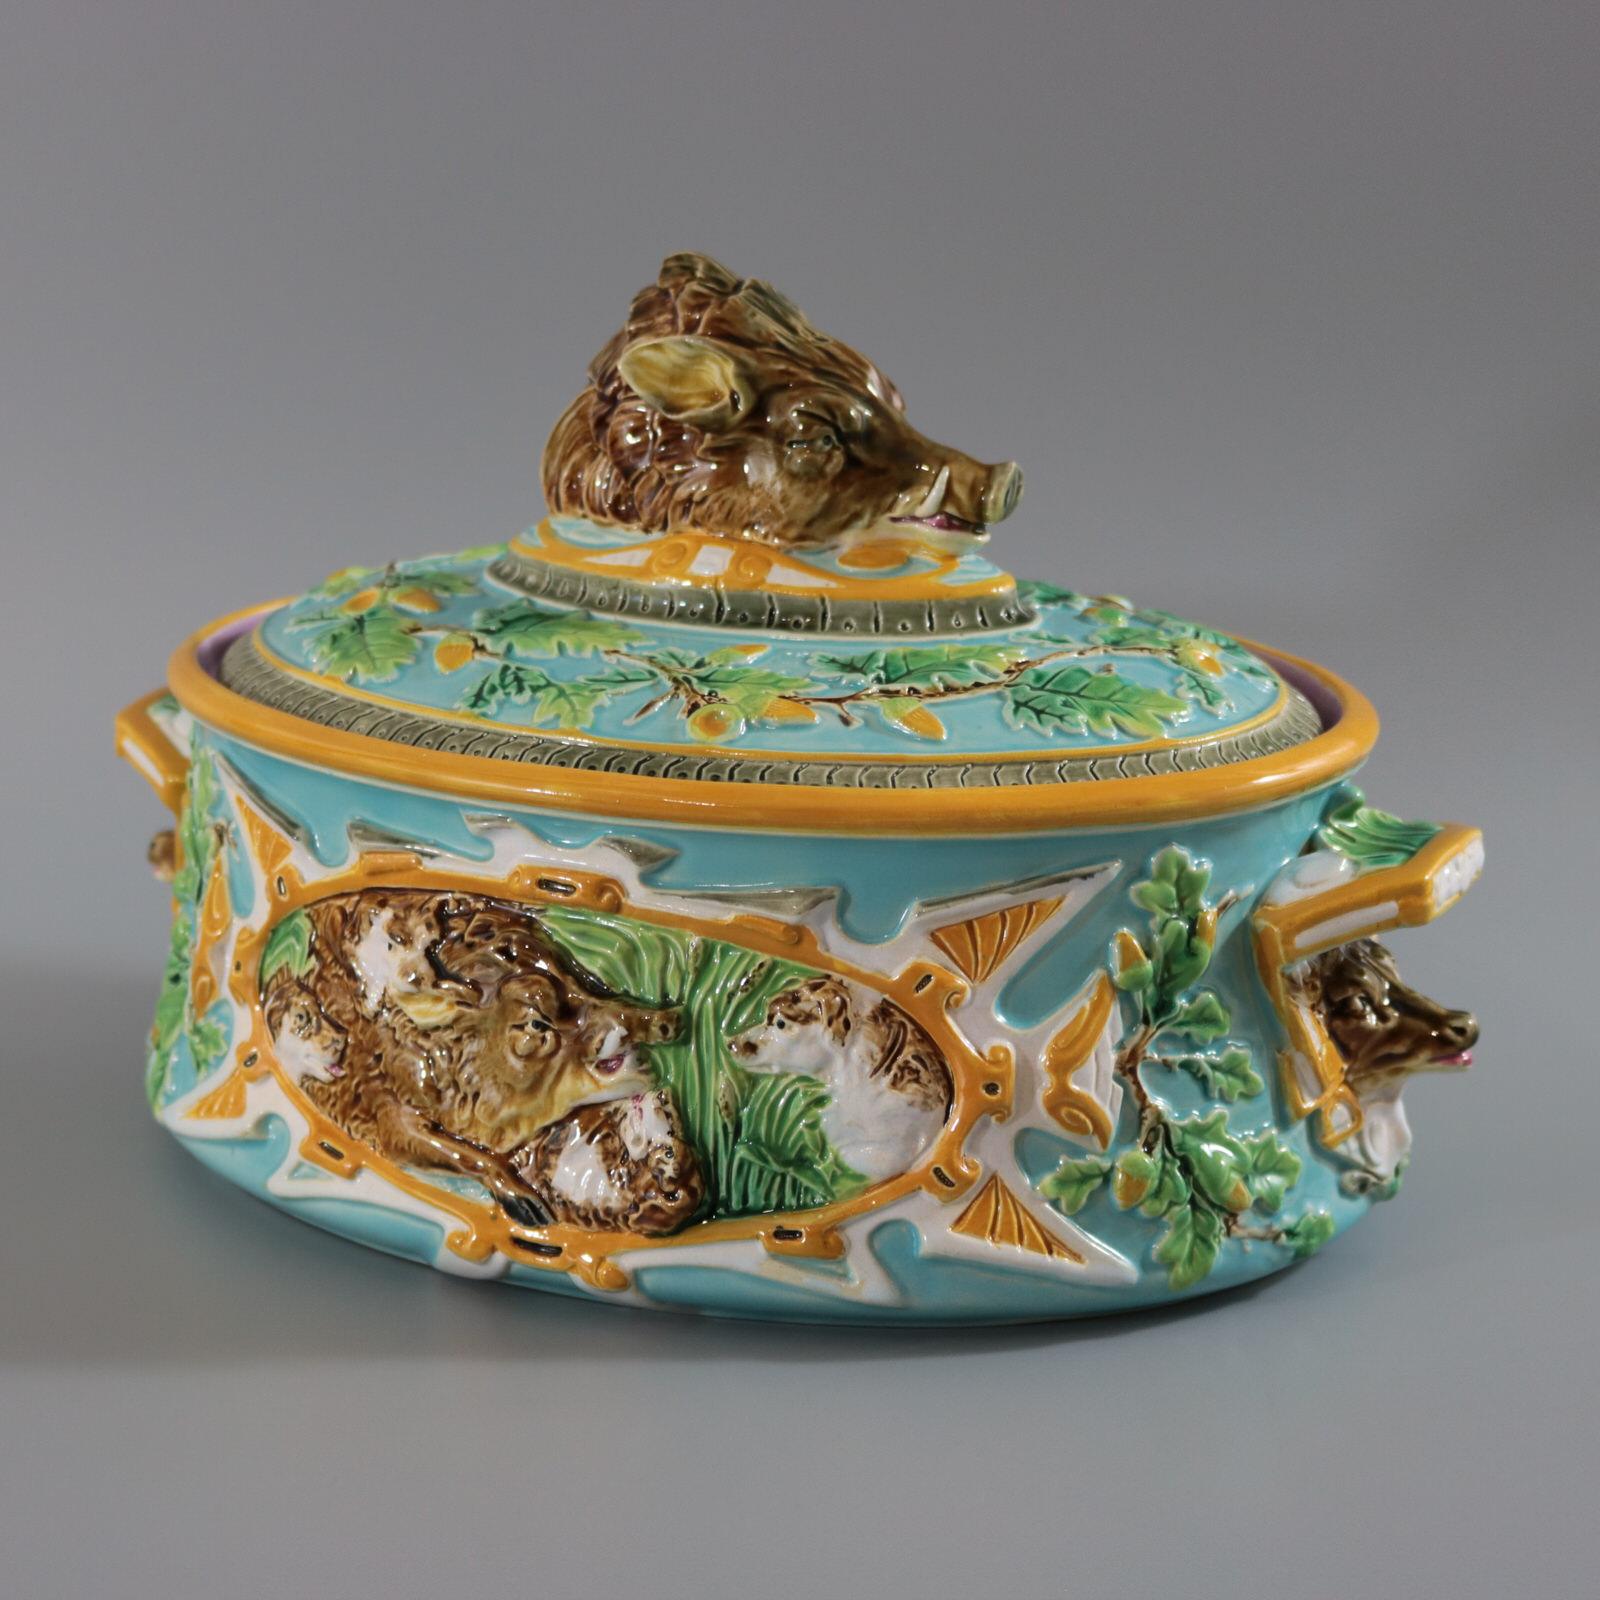 George Jones Majolica game pie dish which features the lid with a knop modelled as a wild boar head, an oak leaf and acorn border. The dish has handles at either end, with stag heads underneath. Panels on the sides depict a wild boar being hunted by